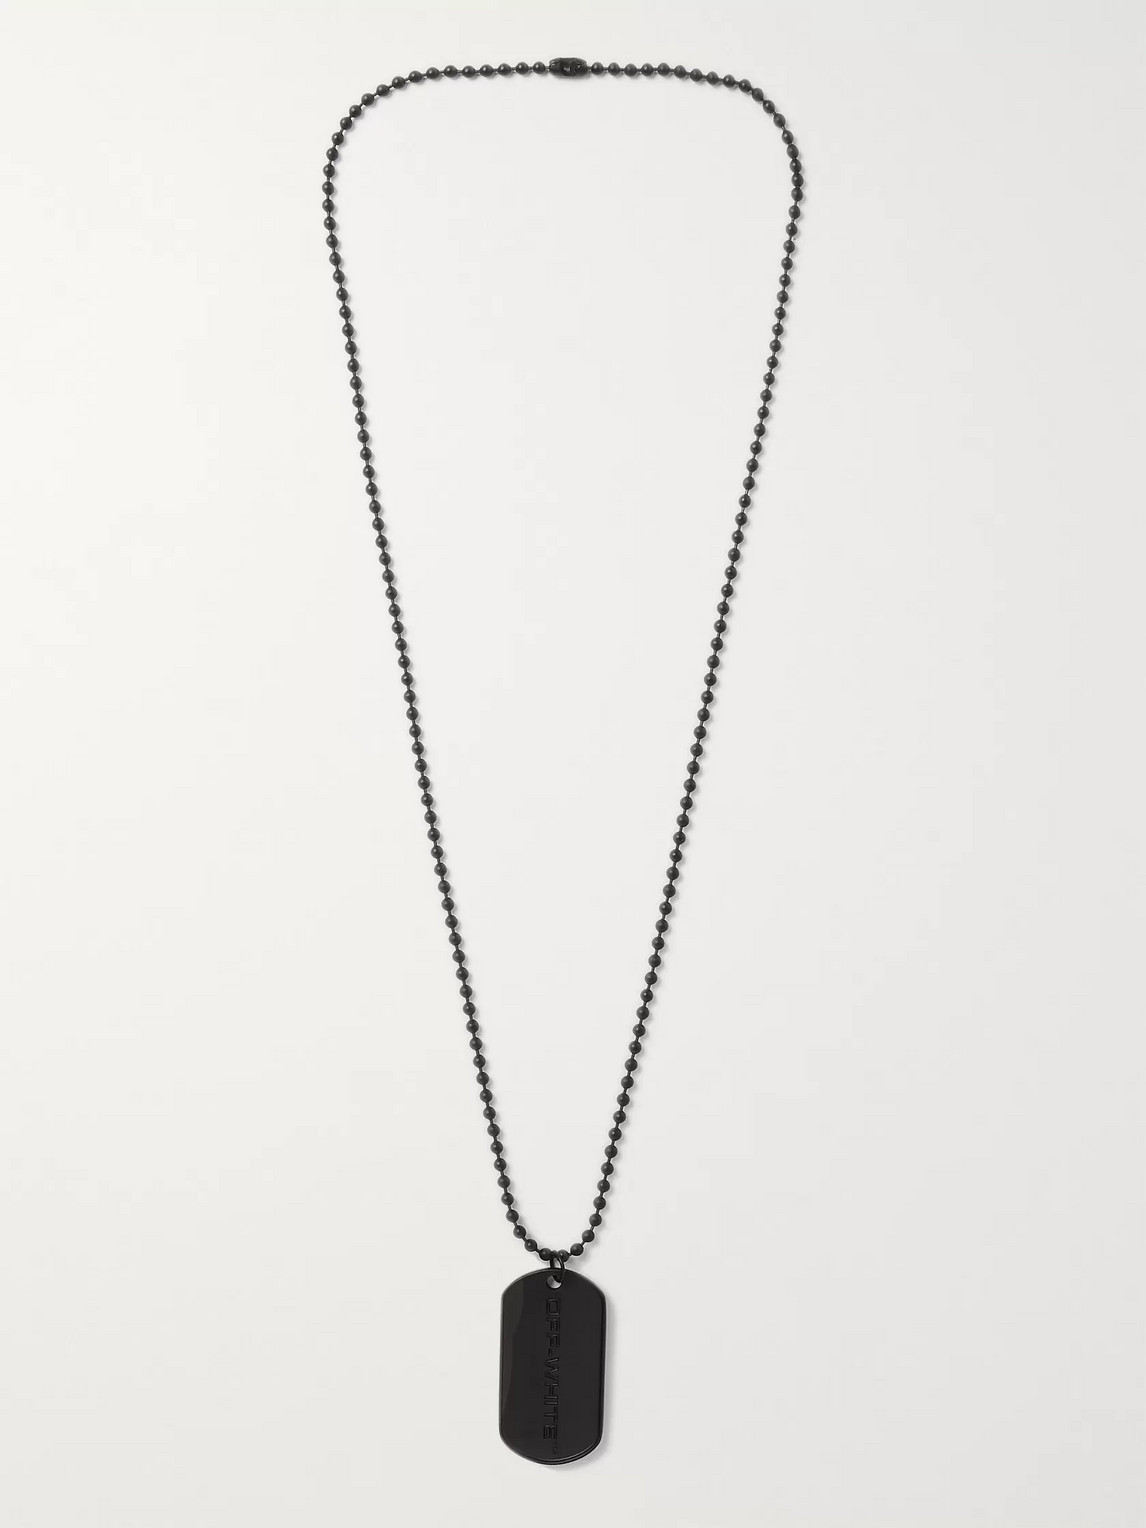 OFF-WHITE ENGRAVED BLACKENED NECKLACE